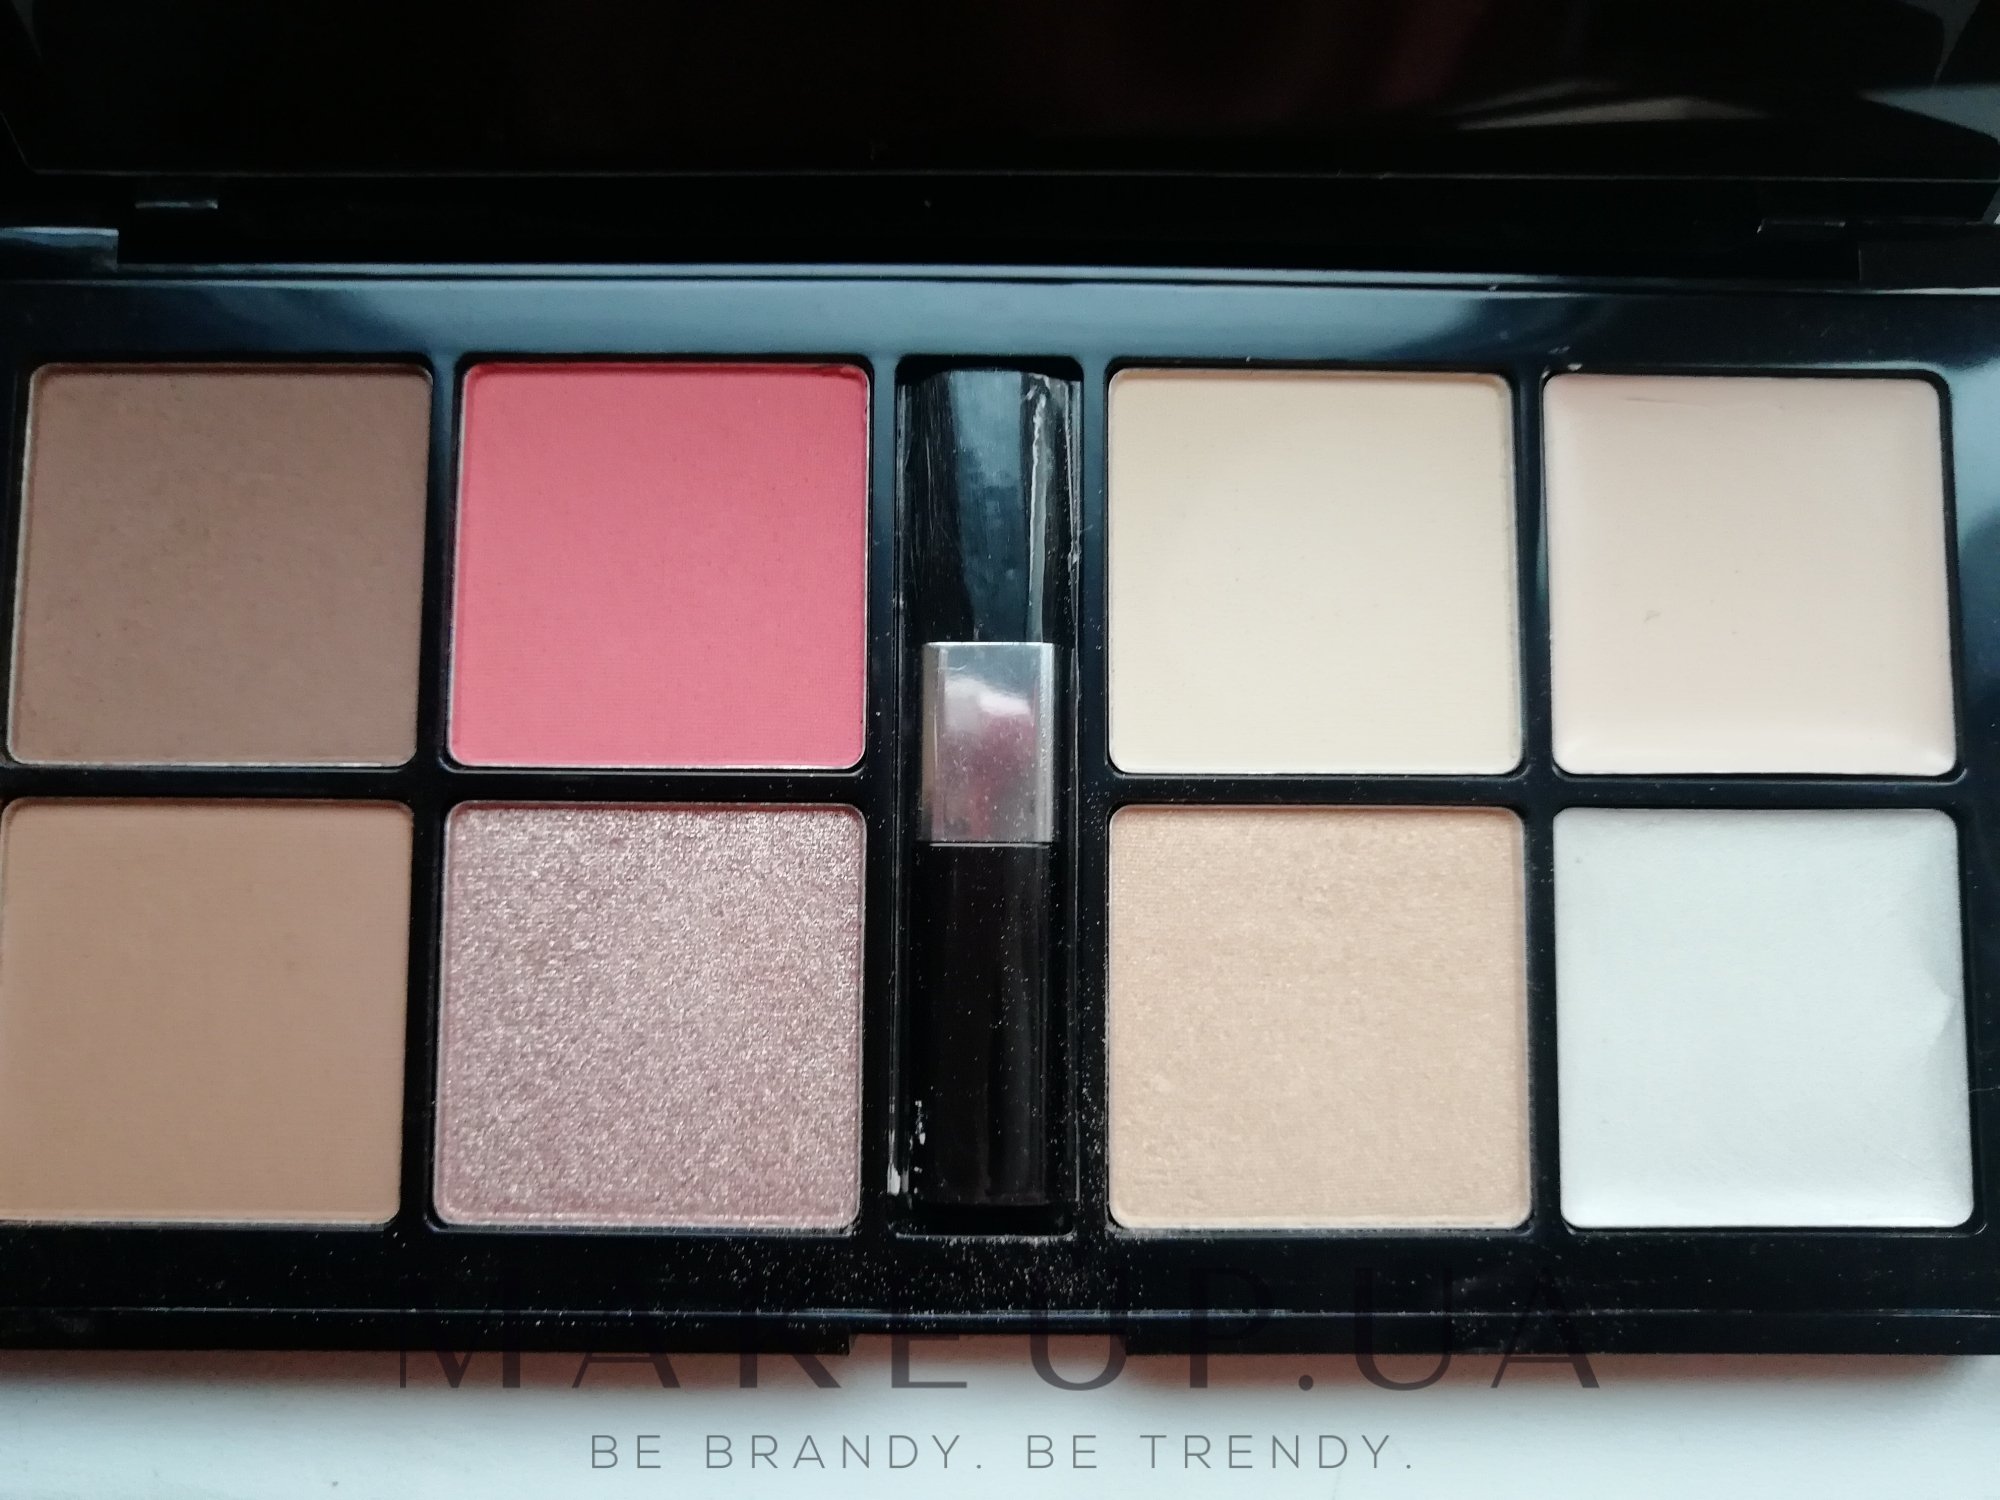 Catrice Professional Make Up Techniques Face Palette